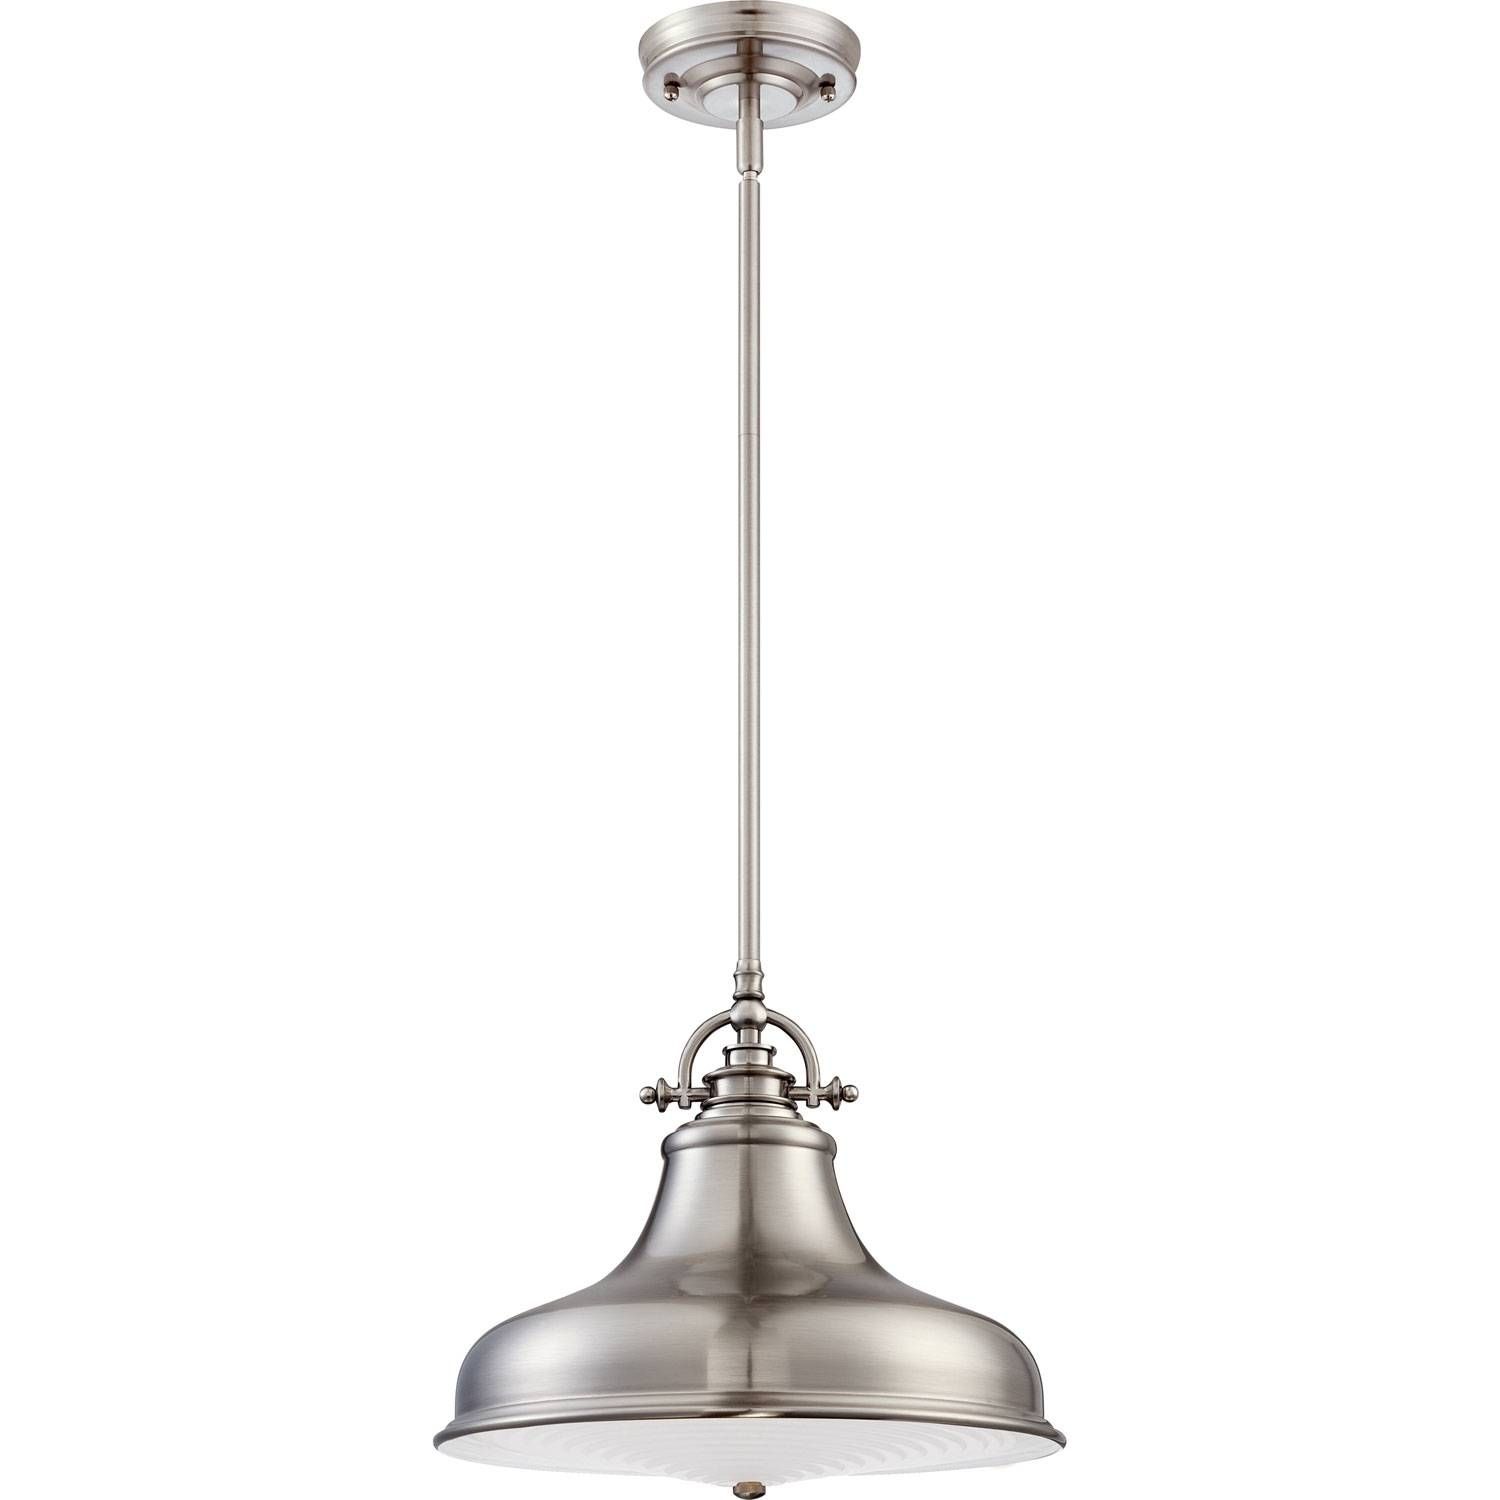 Quoizel Emery Brushed Nickel One Light Pendant On Sale With Regard To Brushed Nickel Pendant Lighting (View 9 of 15)